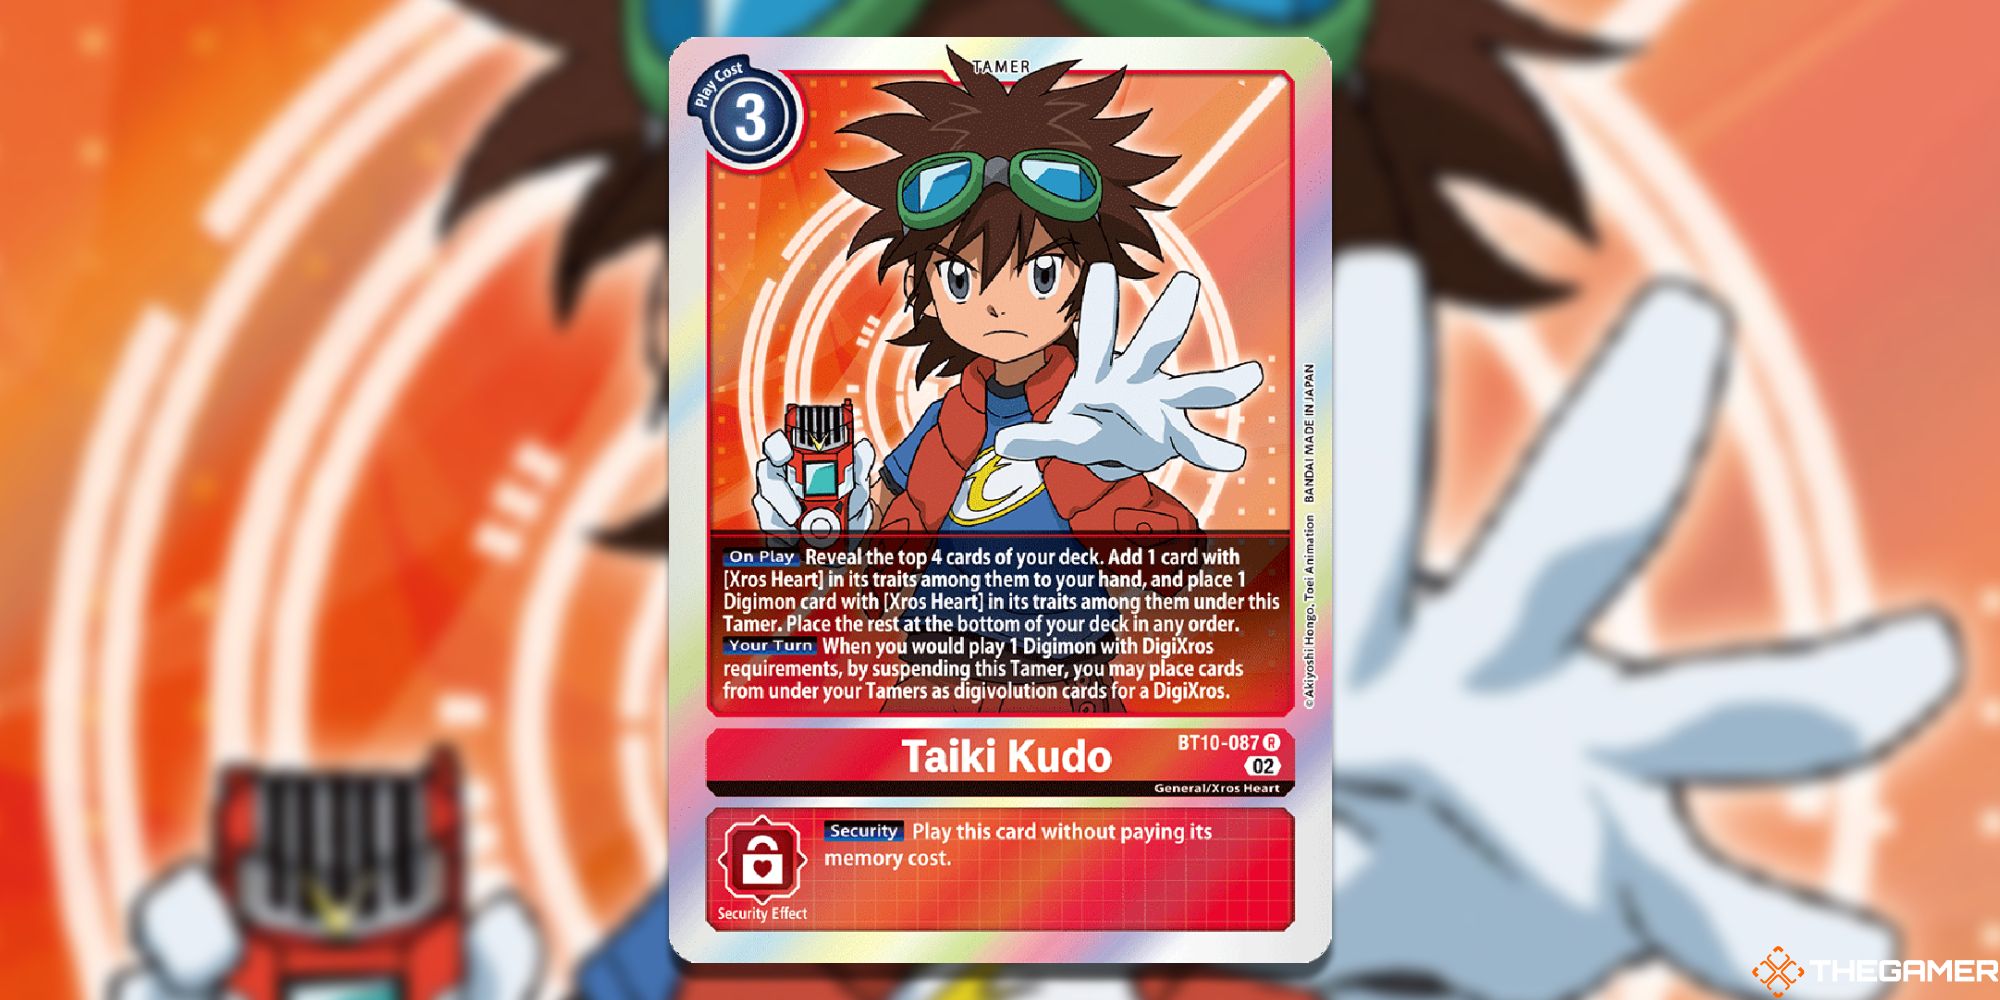 taiki kudo card from digimon card game with blur background